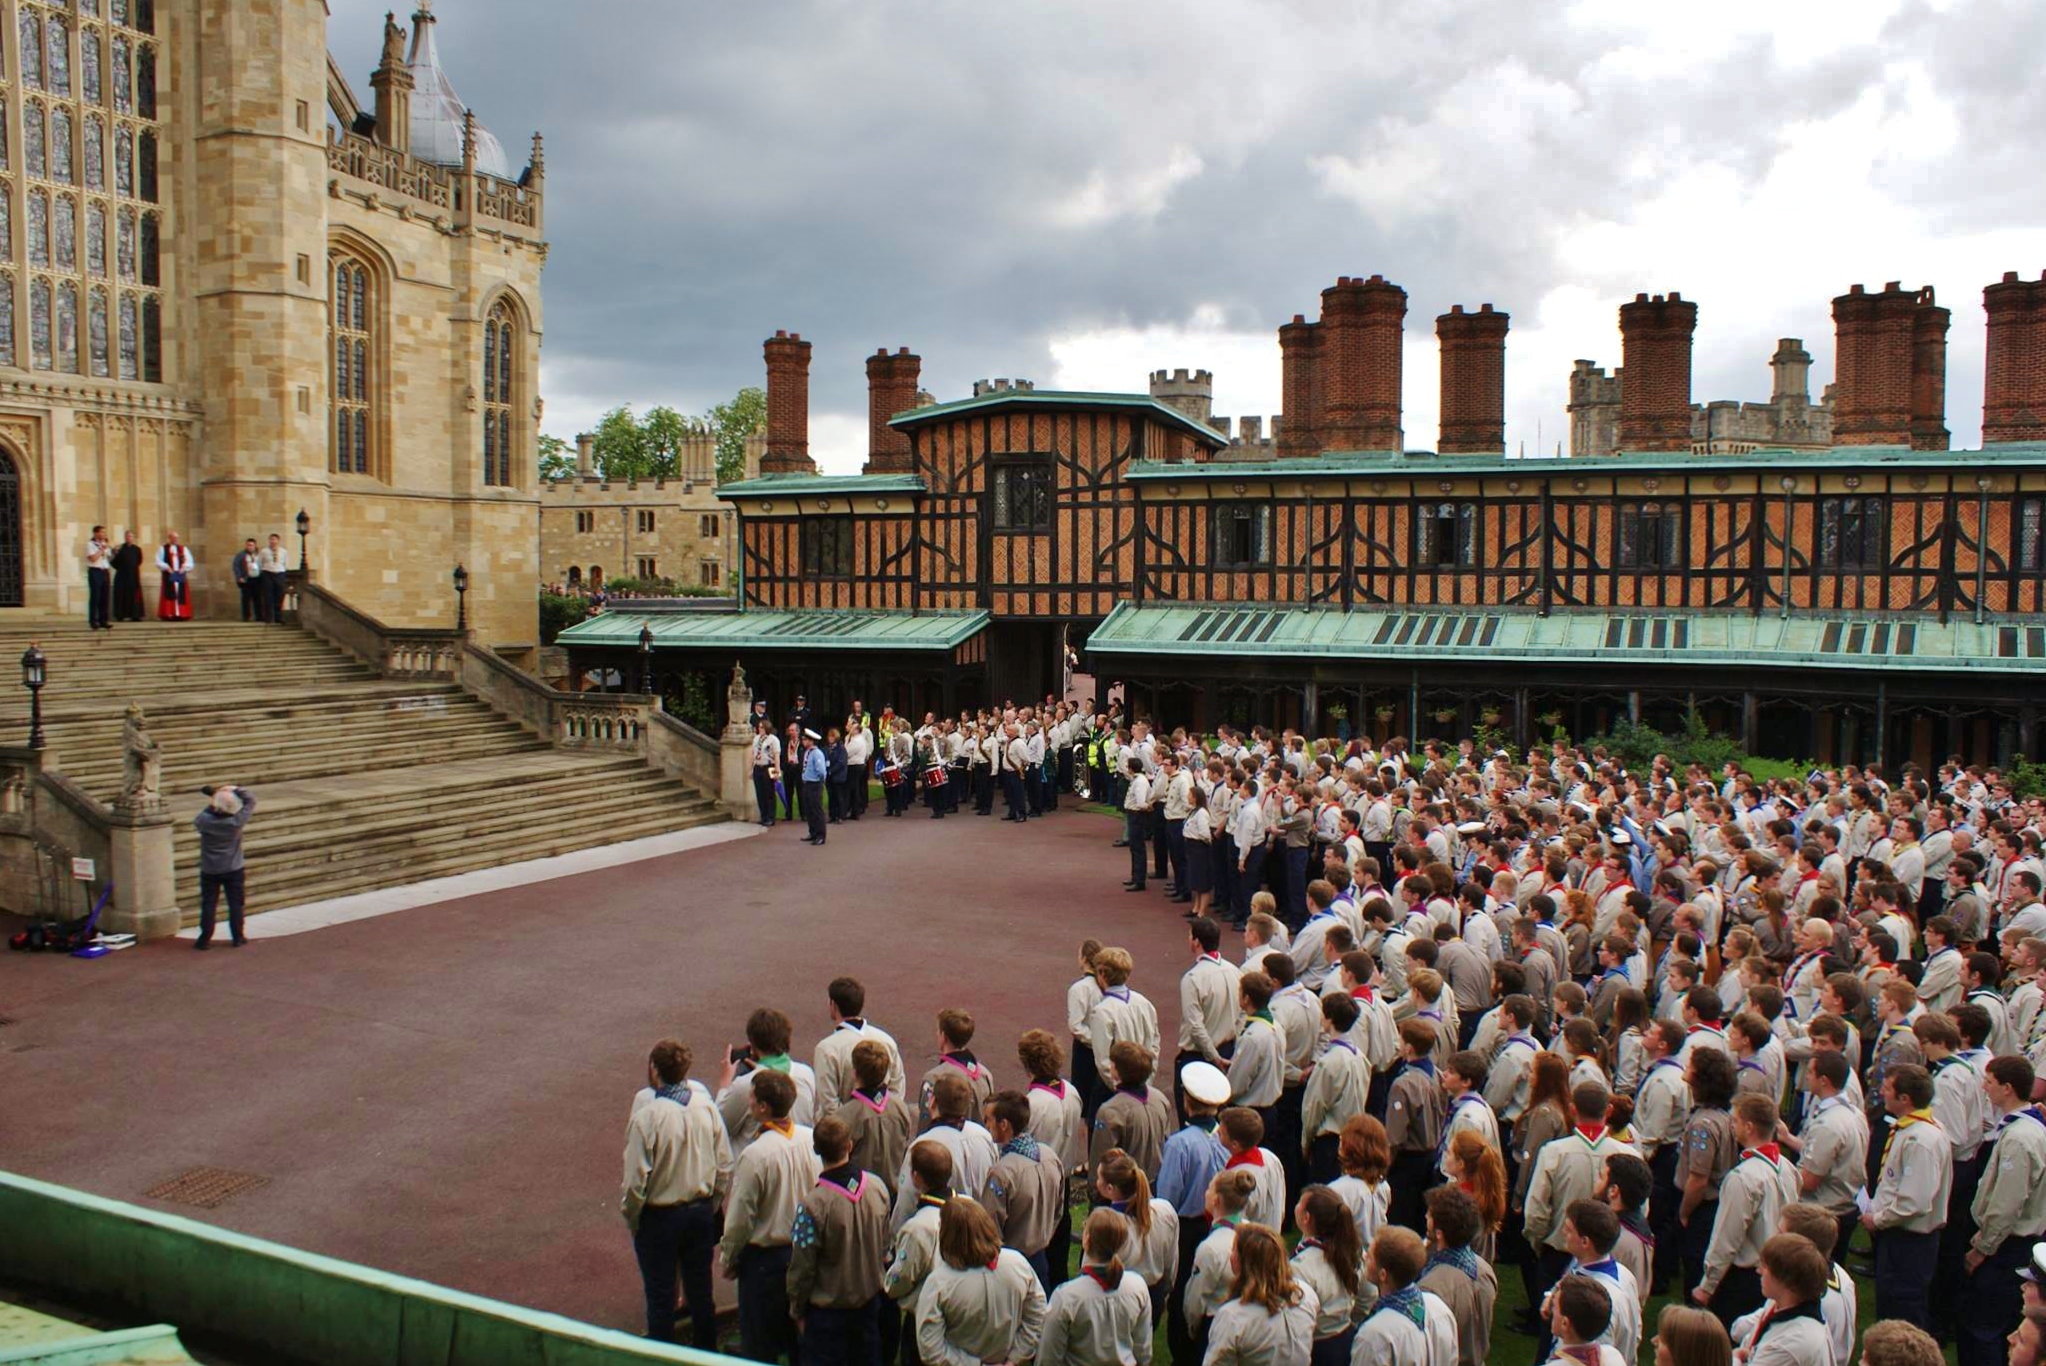 Scouts assembled before the steps of St George's Chapel, Windsor Castle.